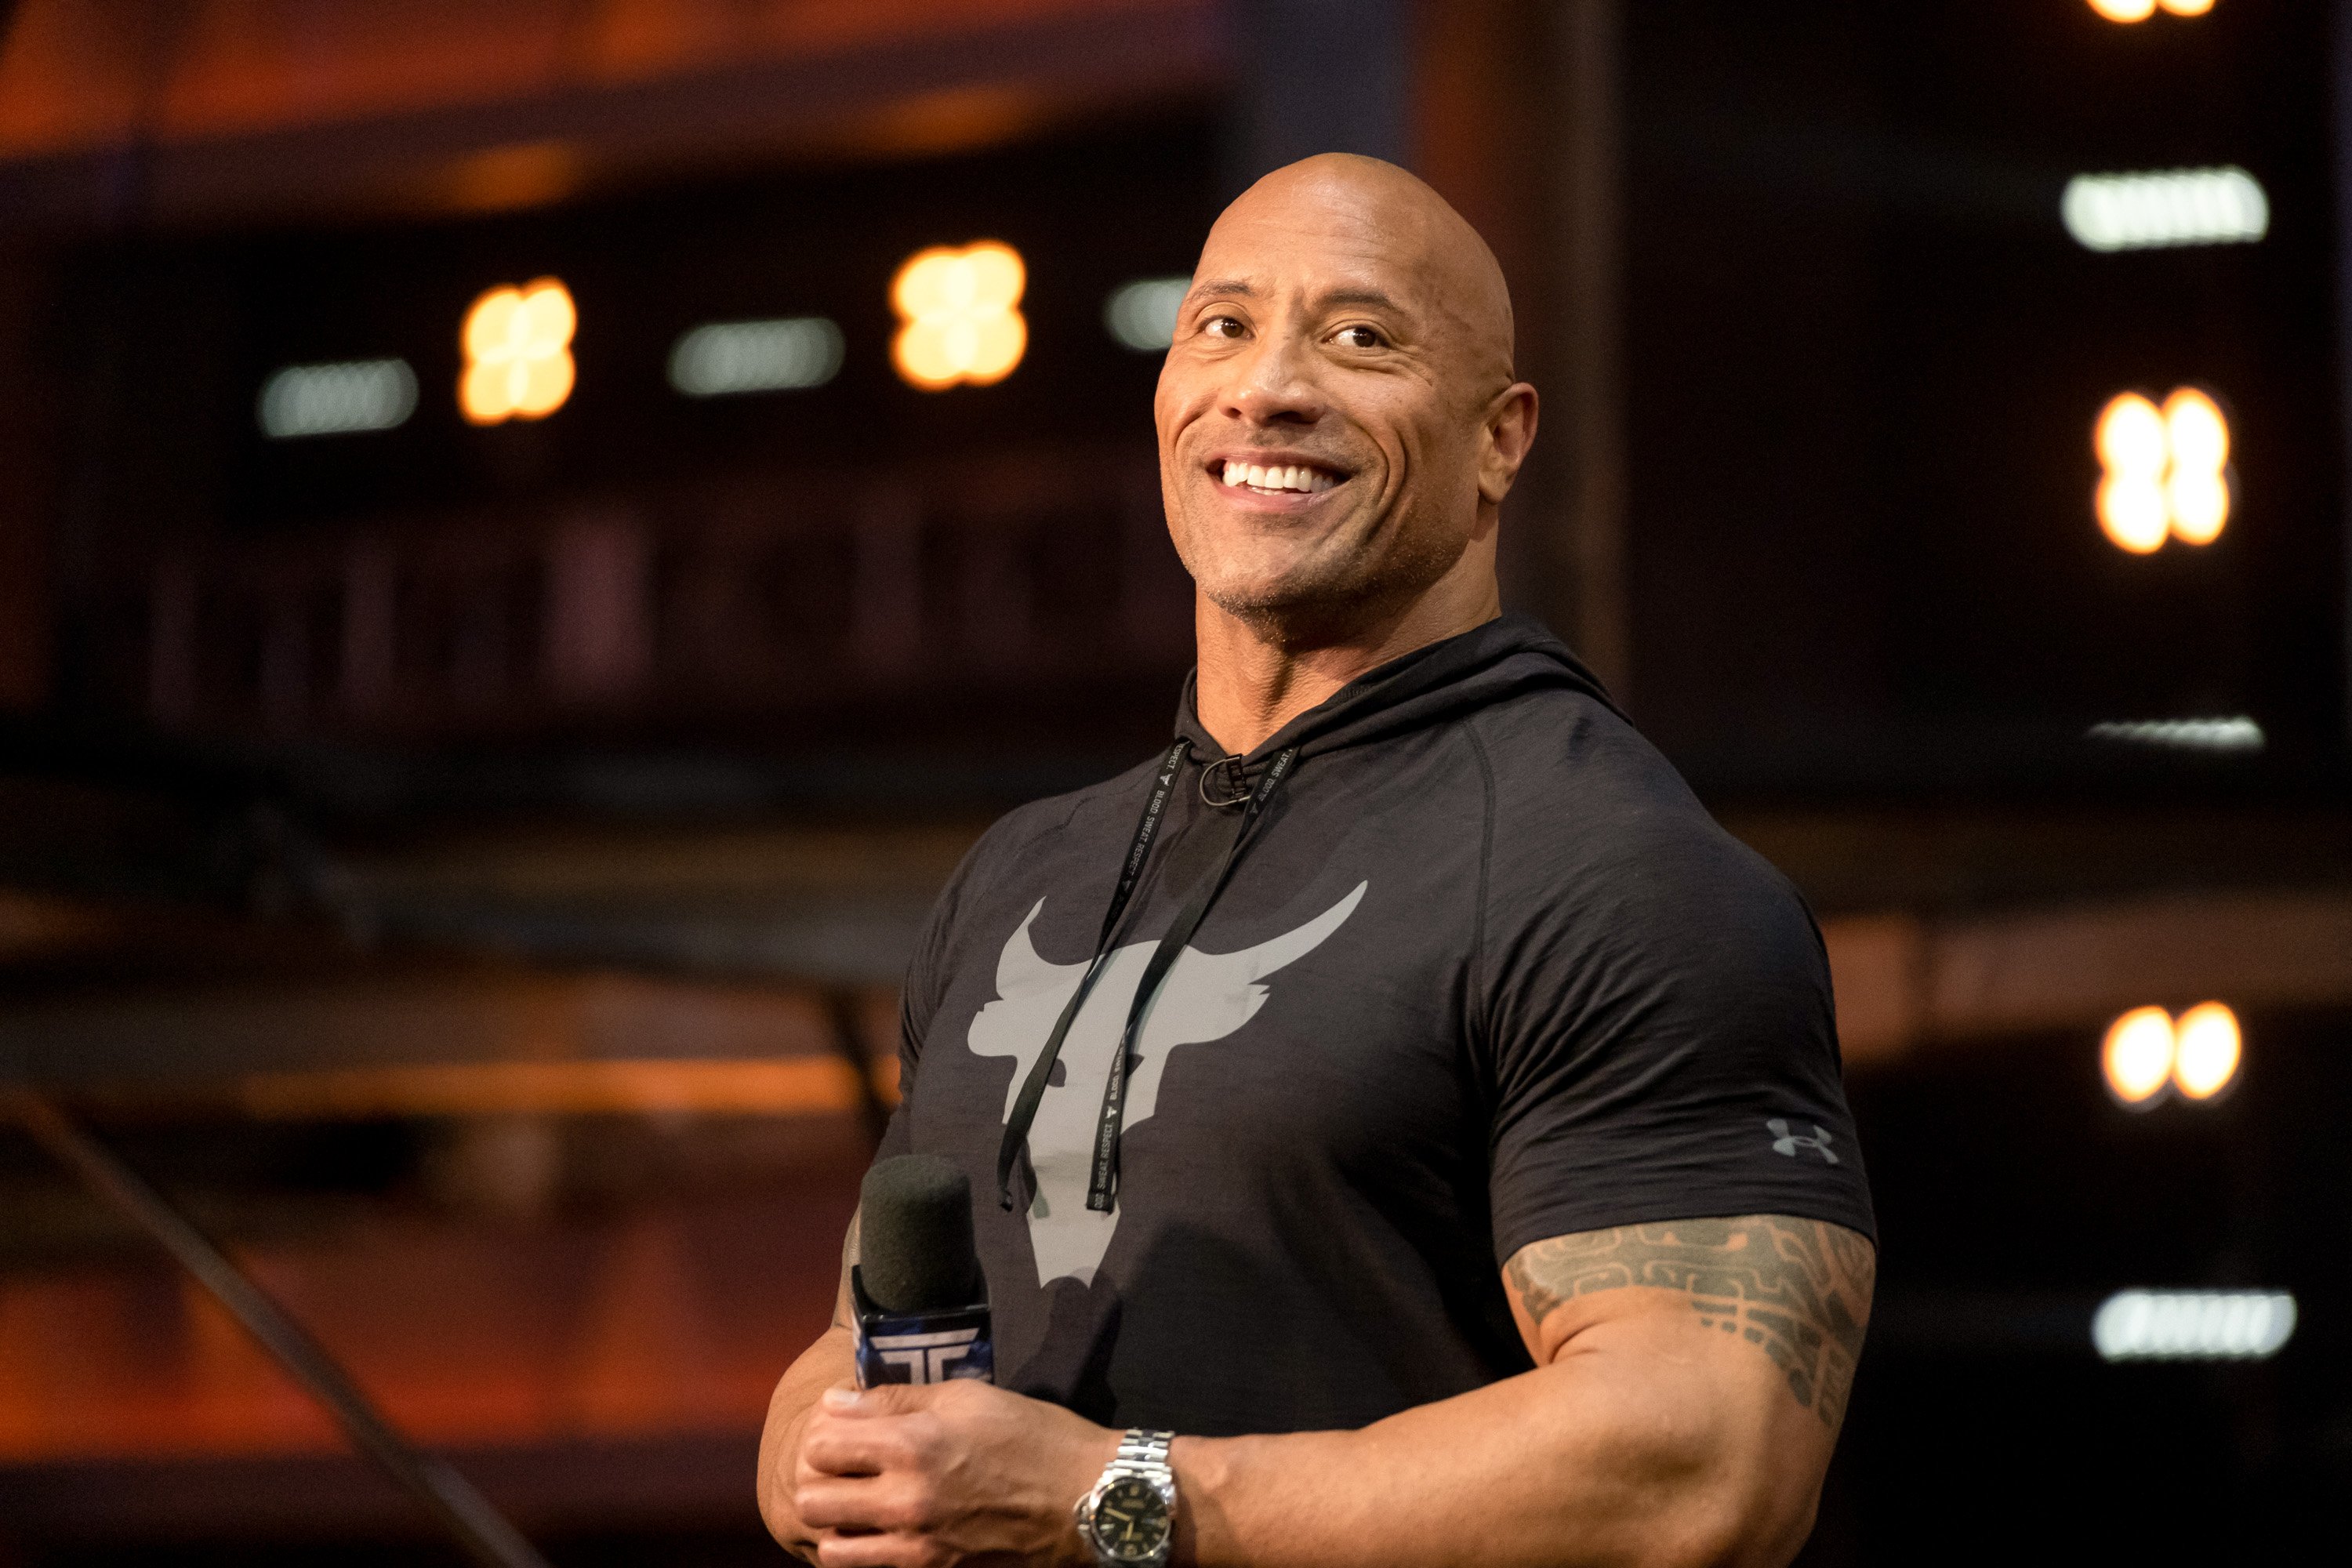 How Did Dwayne Johnson Become the Most Followed American Man on Instagram?